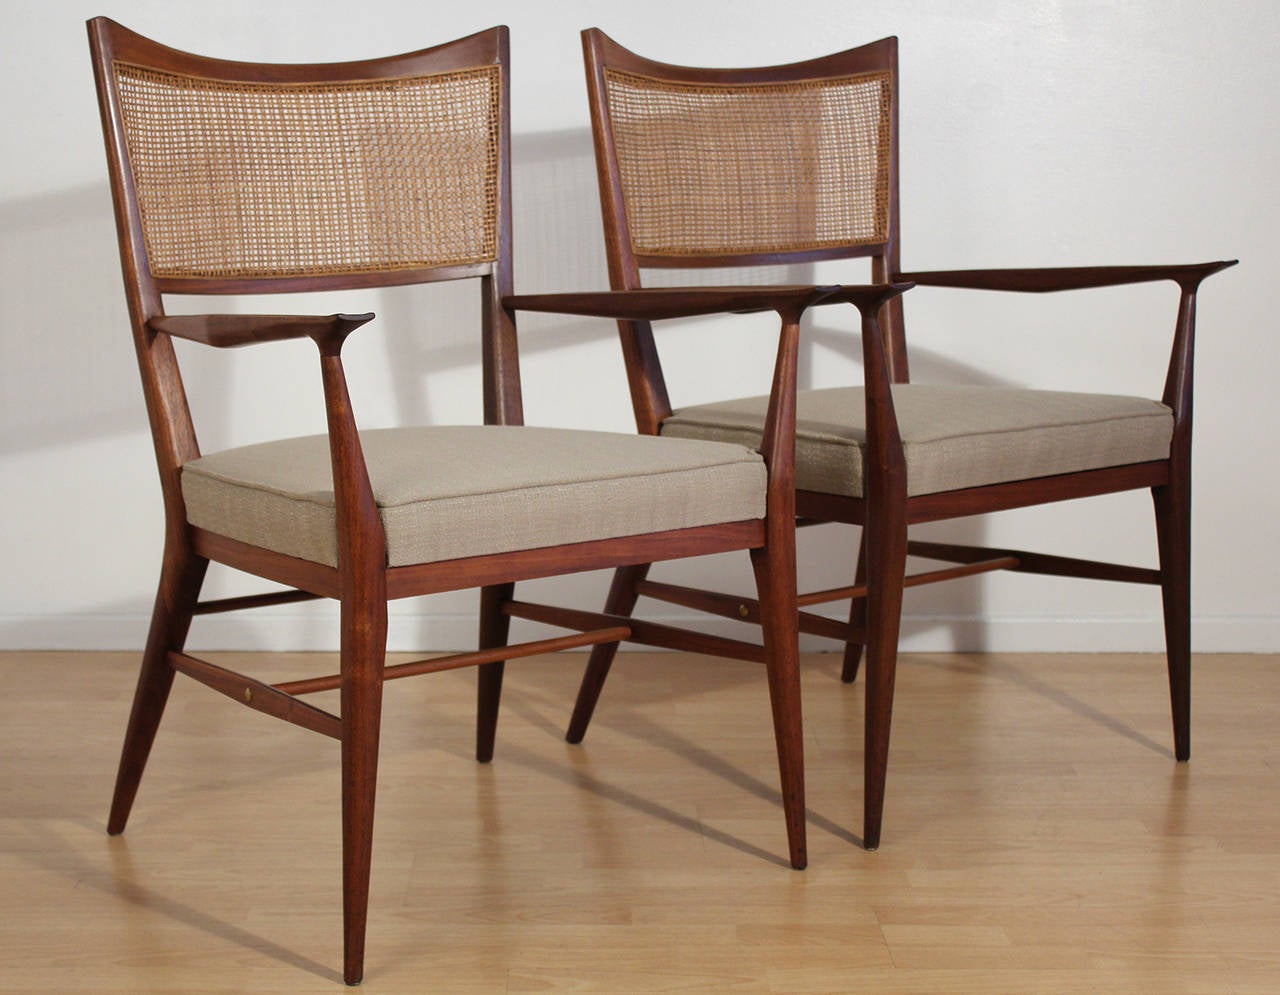 Elegant modernist pair of occasional armchairs or side chairs with cane backs designed by Paul McCobb. This pair is larger than the similar 